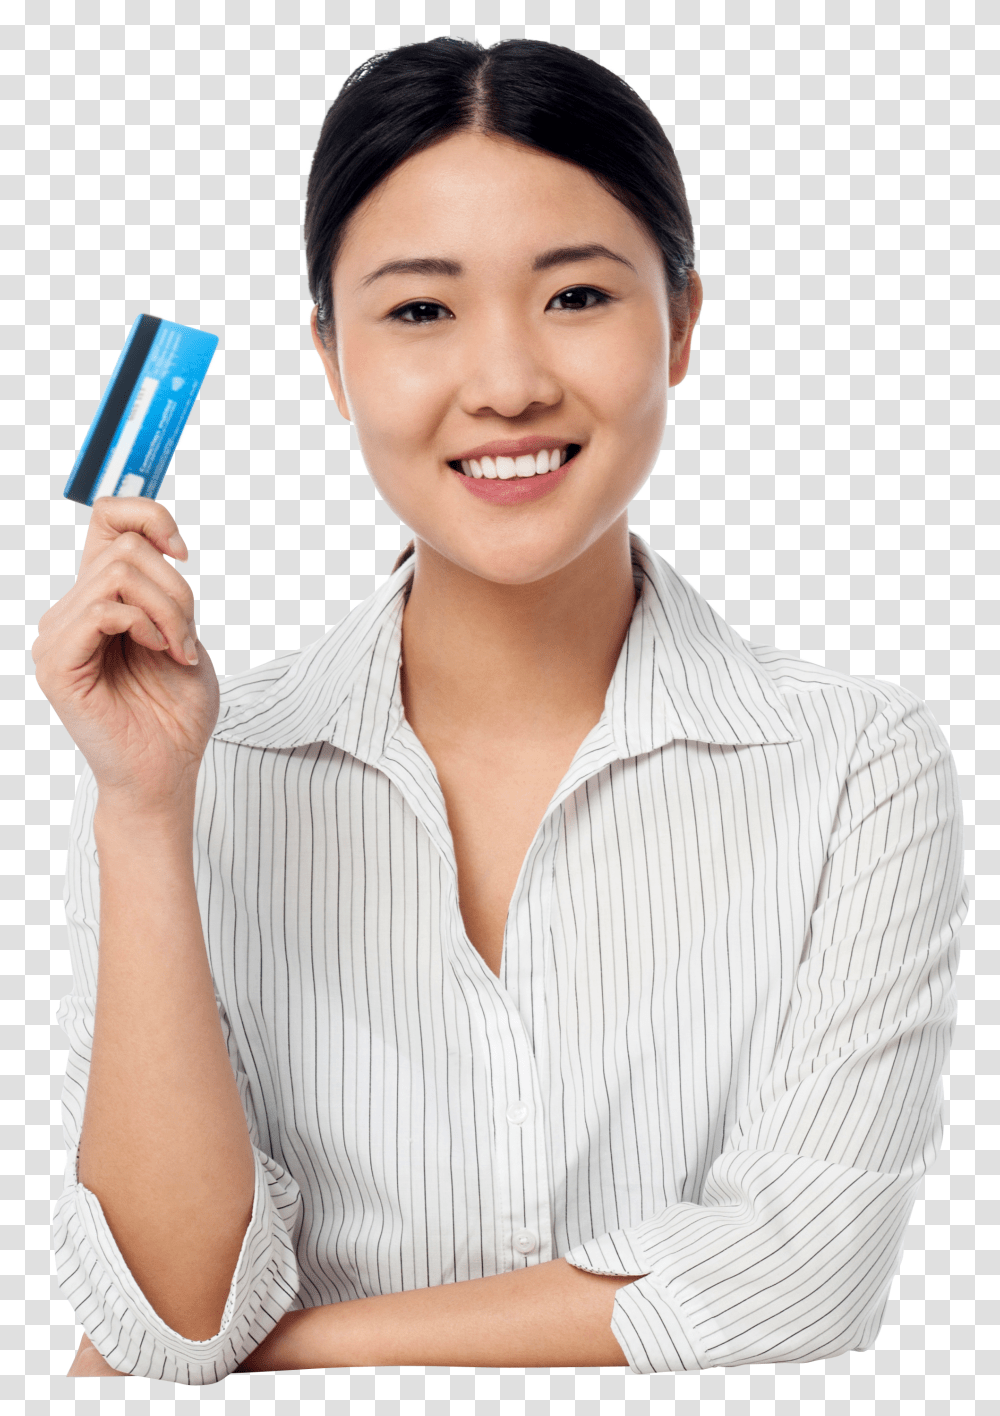 Holding Credit Card Free Transparent Png